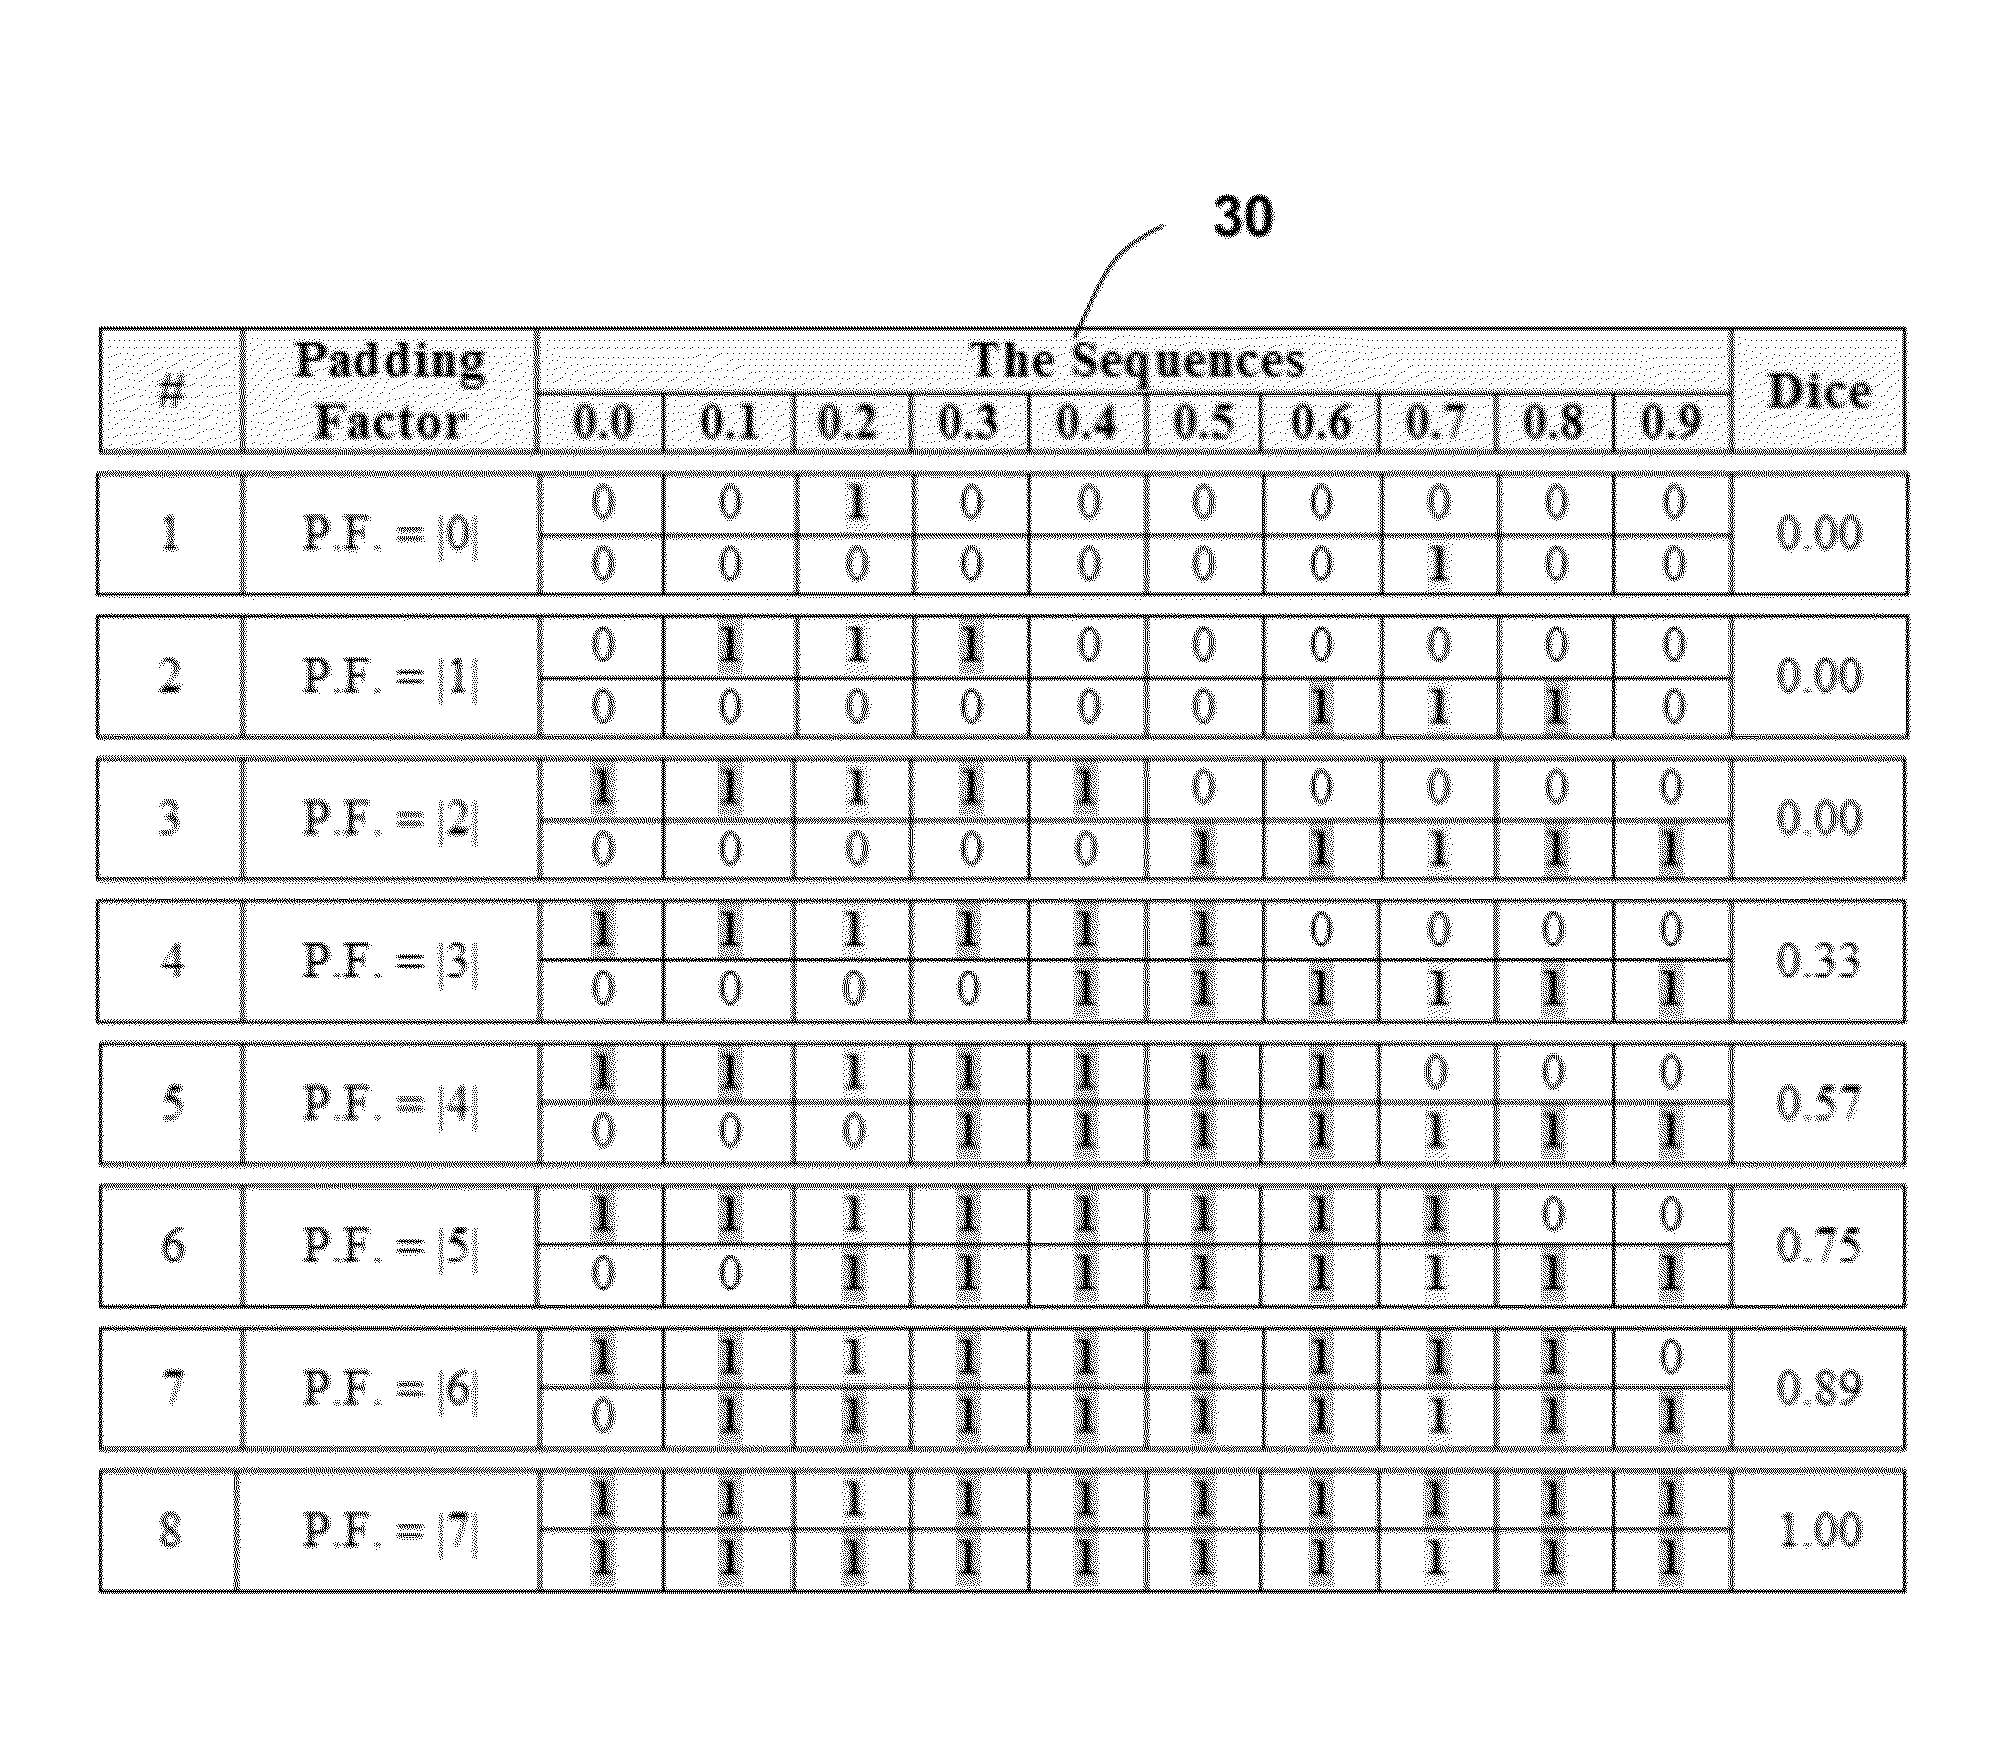 Method and system for extended bitmap indexing